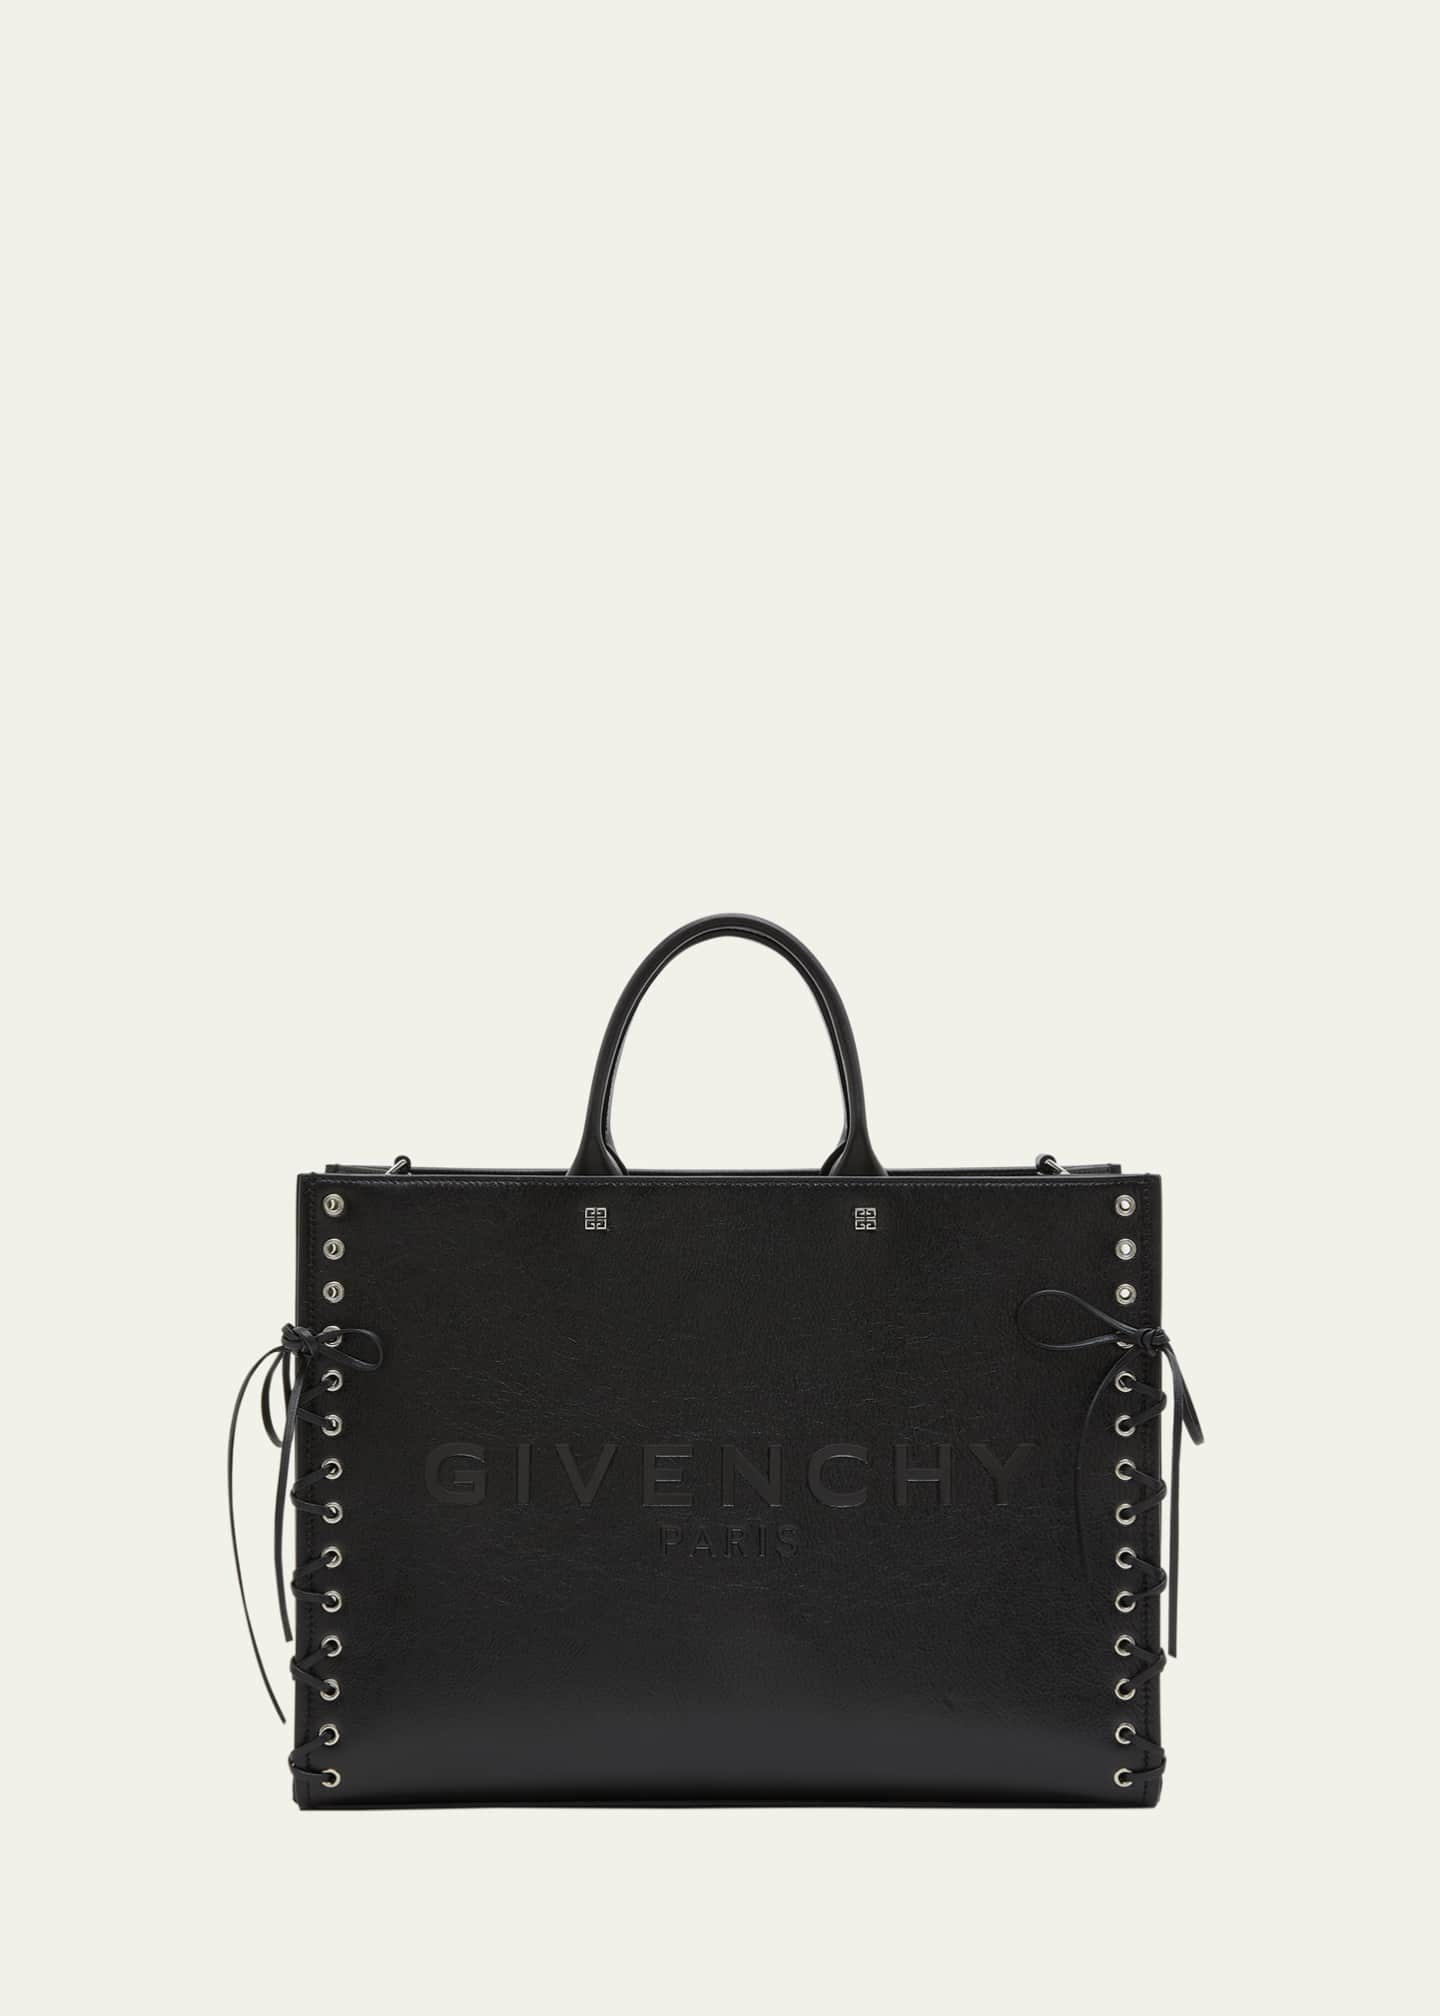 Givenchy G-Tote Medium Shopping Bag in Leather with Corset Detail -  Bergdorf Goodman